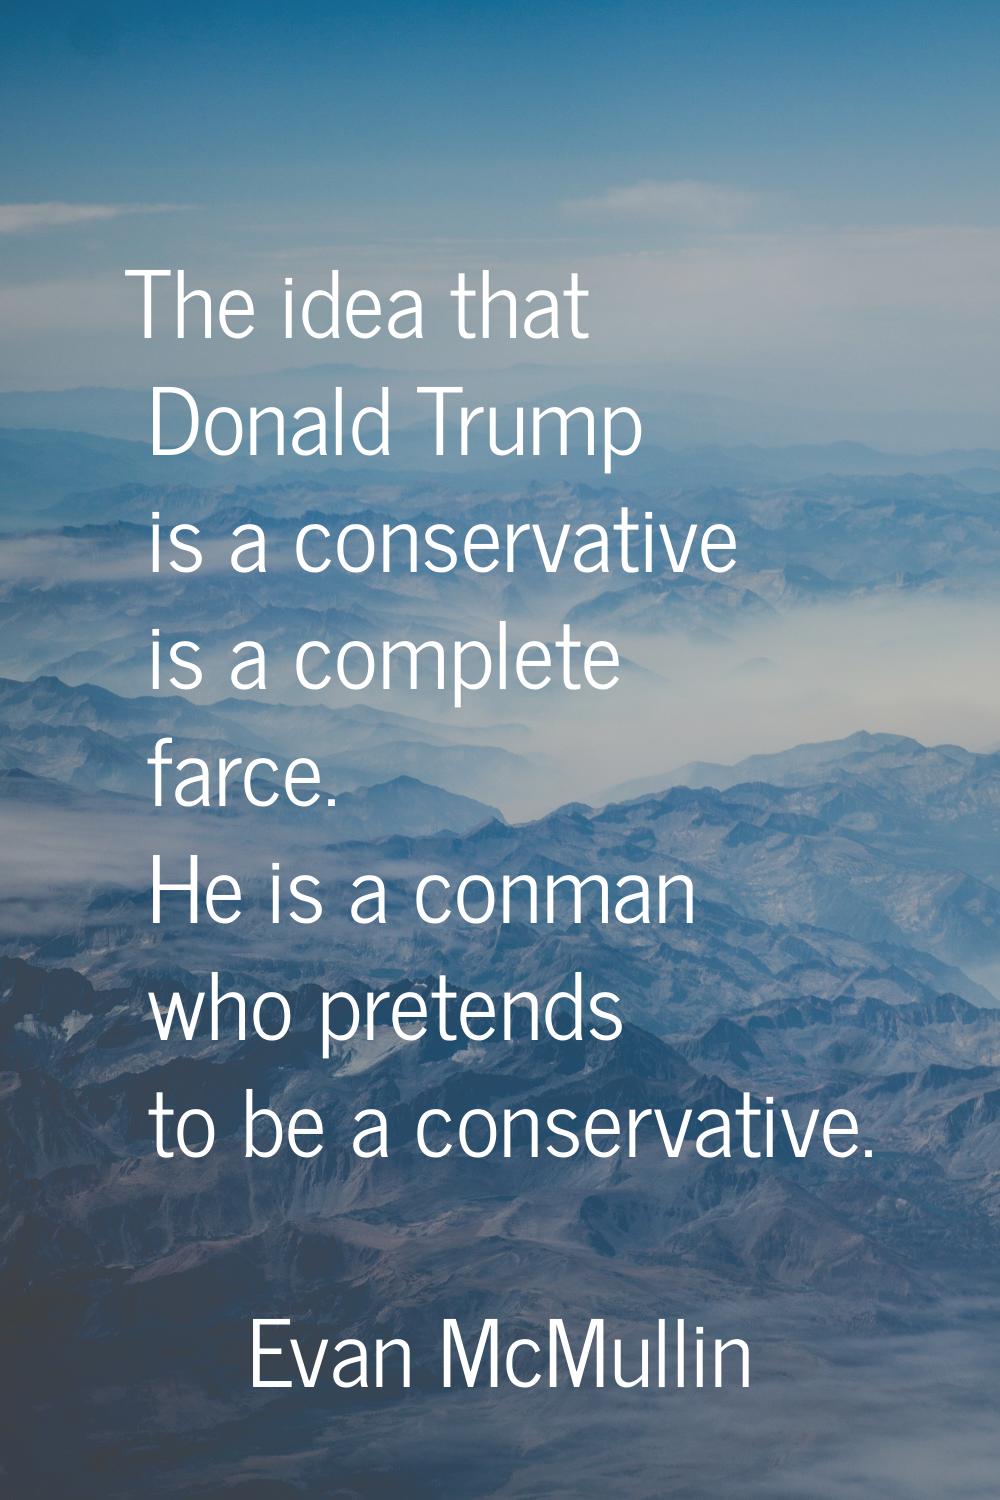 The idea that Donald Trump is a conservative is a complete farce. He is a conman who pretends to be